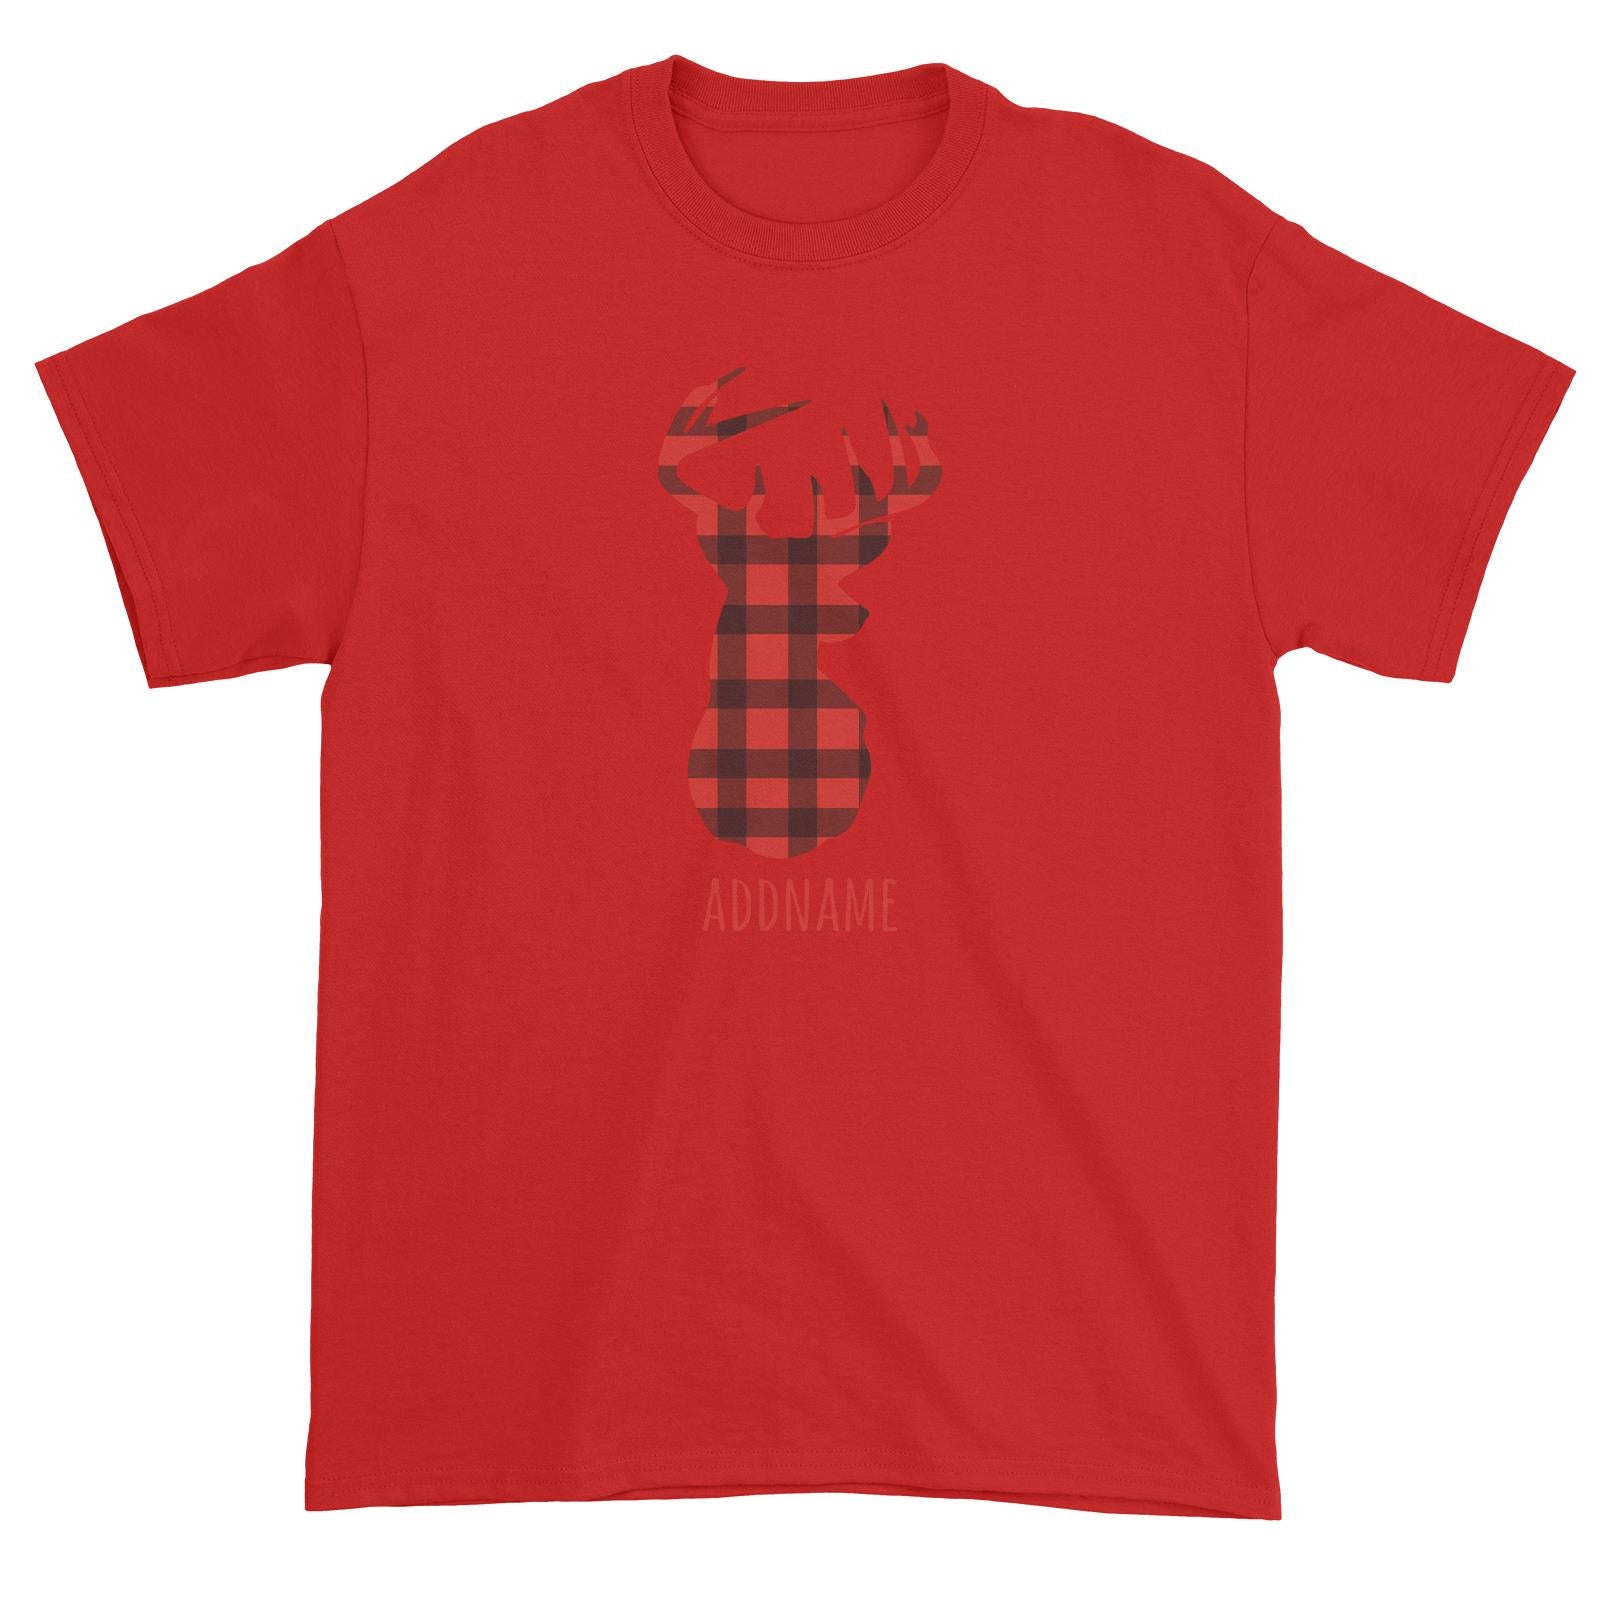 Papa Deer Silhouette Checkered Pattern Addname Unisex T-Shirt Christmas Matching Family Animal Personalizable Designs